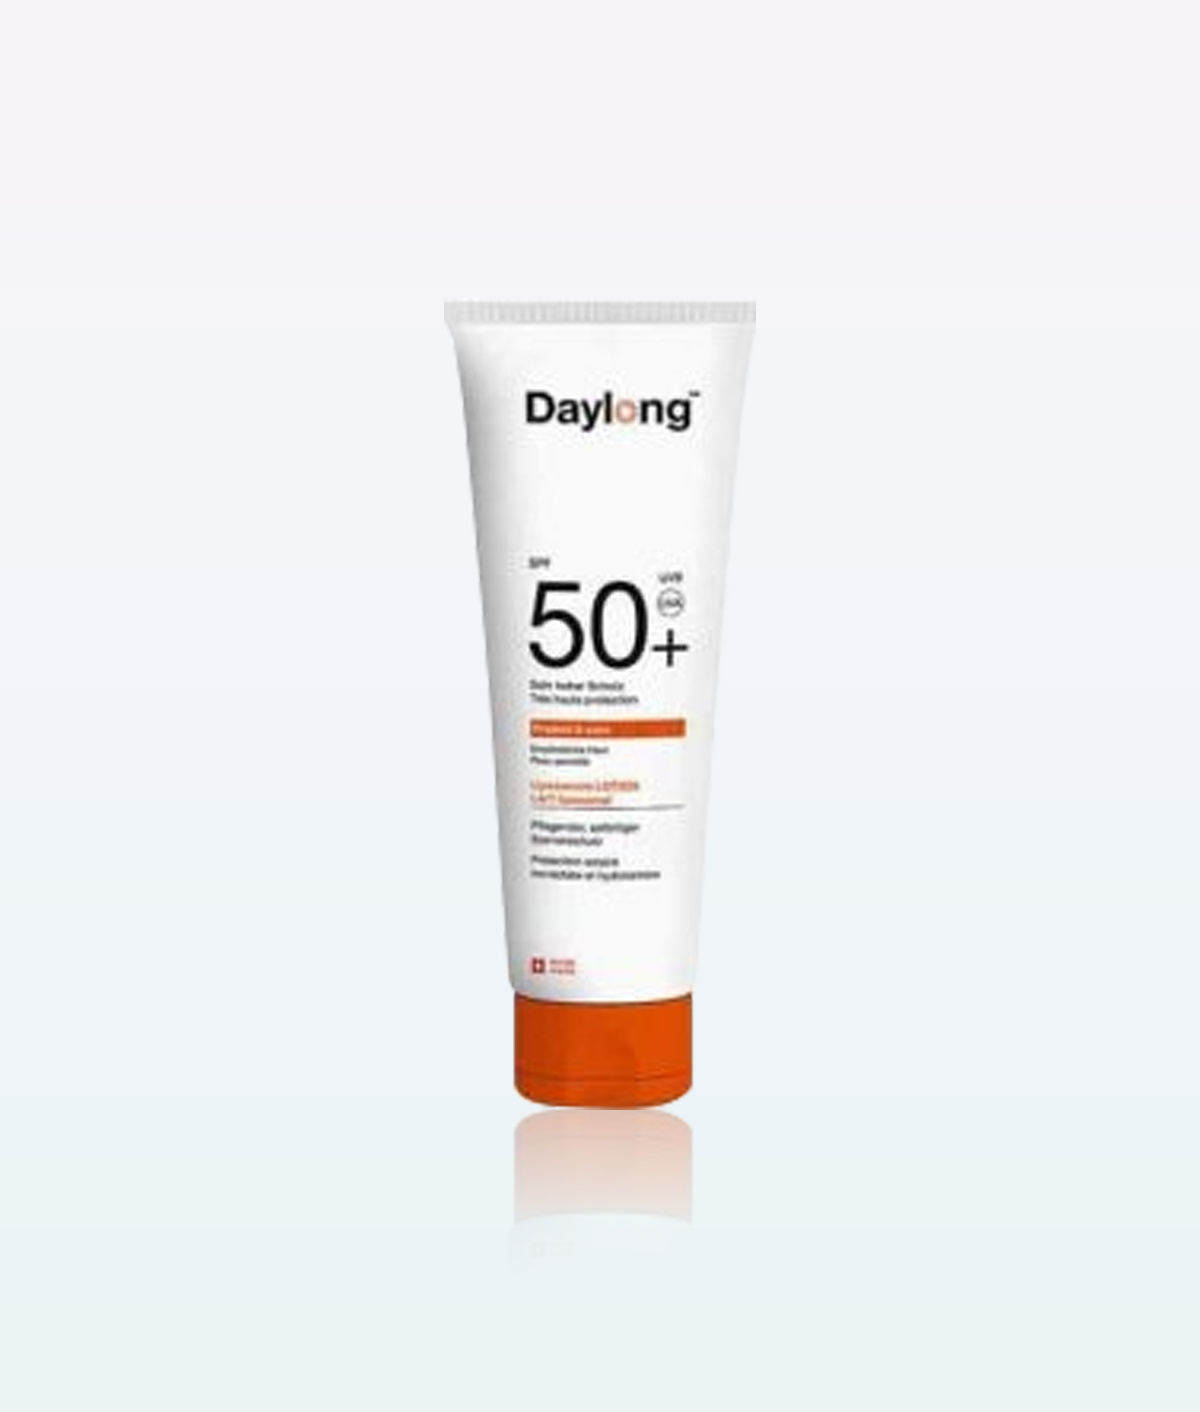 Daylong Protect And Care Lotion SPF 50+